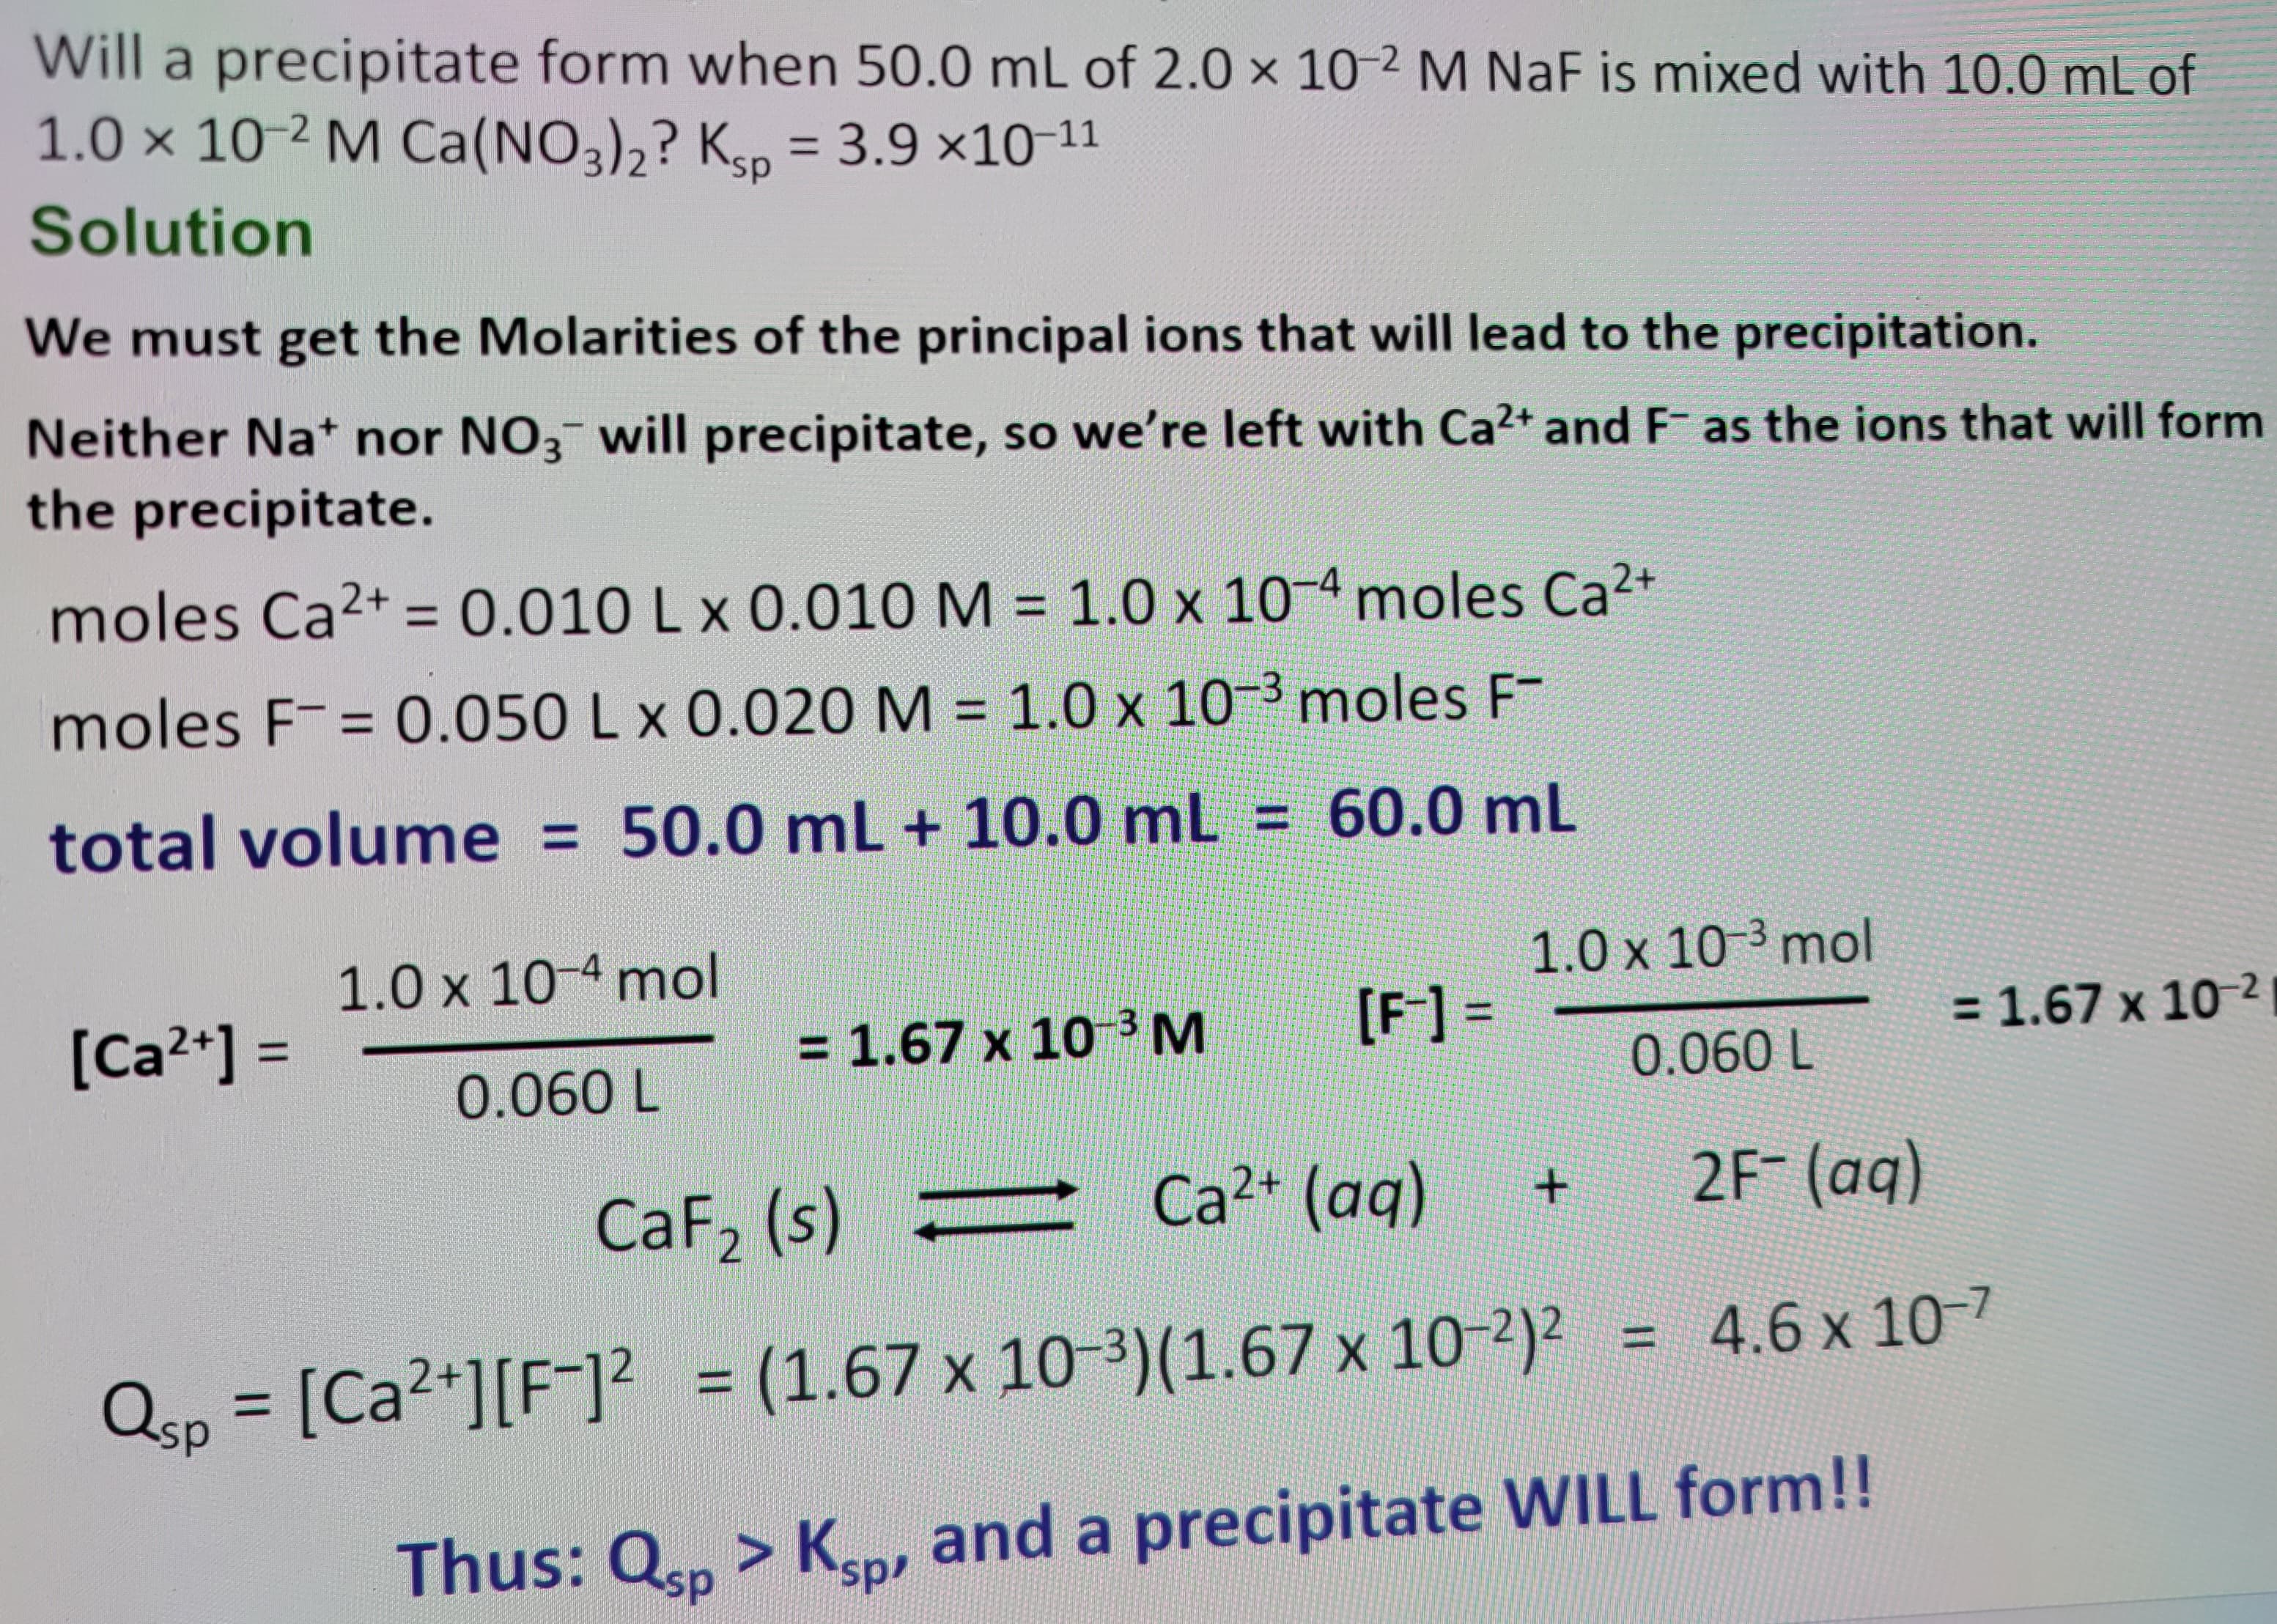 Will a precipitate form when 50.0 mL of 2.0 x 10-2 M NaF is mixed with 10.0 mL of
1.0 × 10 2 M Ca(NO3)2? Ksp = 3.9 ×10-11
Solution
We must get the Molarities of the principal ions that will lead to the precipitation.
Neither Na+ nor NO3 will precipitate, so we're left with Ca2+ and F as the ions that will form
the precipitate.
moles Ca2+ = 0.010 L x 0.010 M = 1.0 × 10-4 moles Ca2+
moles F= 0.050 L x 0.020 M = 1.0 x 10-3 moles F-
total volume = 50.0 mL + 10.0 mL = 60.0 mL
1.0 × 10-4 mol
[Ca2+] =
1.0 x 10-3 mol
= 1.67 x 103 M
[F] =
= 1.67 x 10-2
0.060 L
0.060 L
CaF2 (s) -
Ca2+ (aq)
+
2F- (aq)
4.6 x 10-7
Qsp = [Ca2+] [F]² = (1.67 x 10-3) (1.67 x 10-2)²
Thus: Qsp > Ksp, and a precipitate WILL form!!